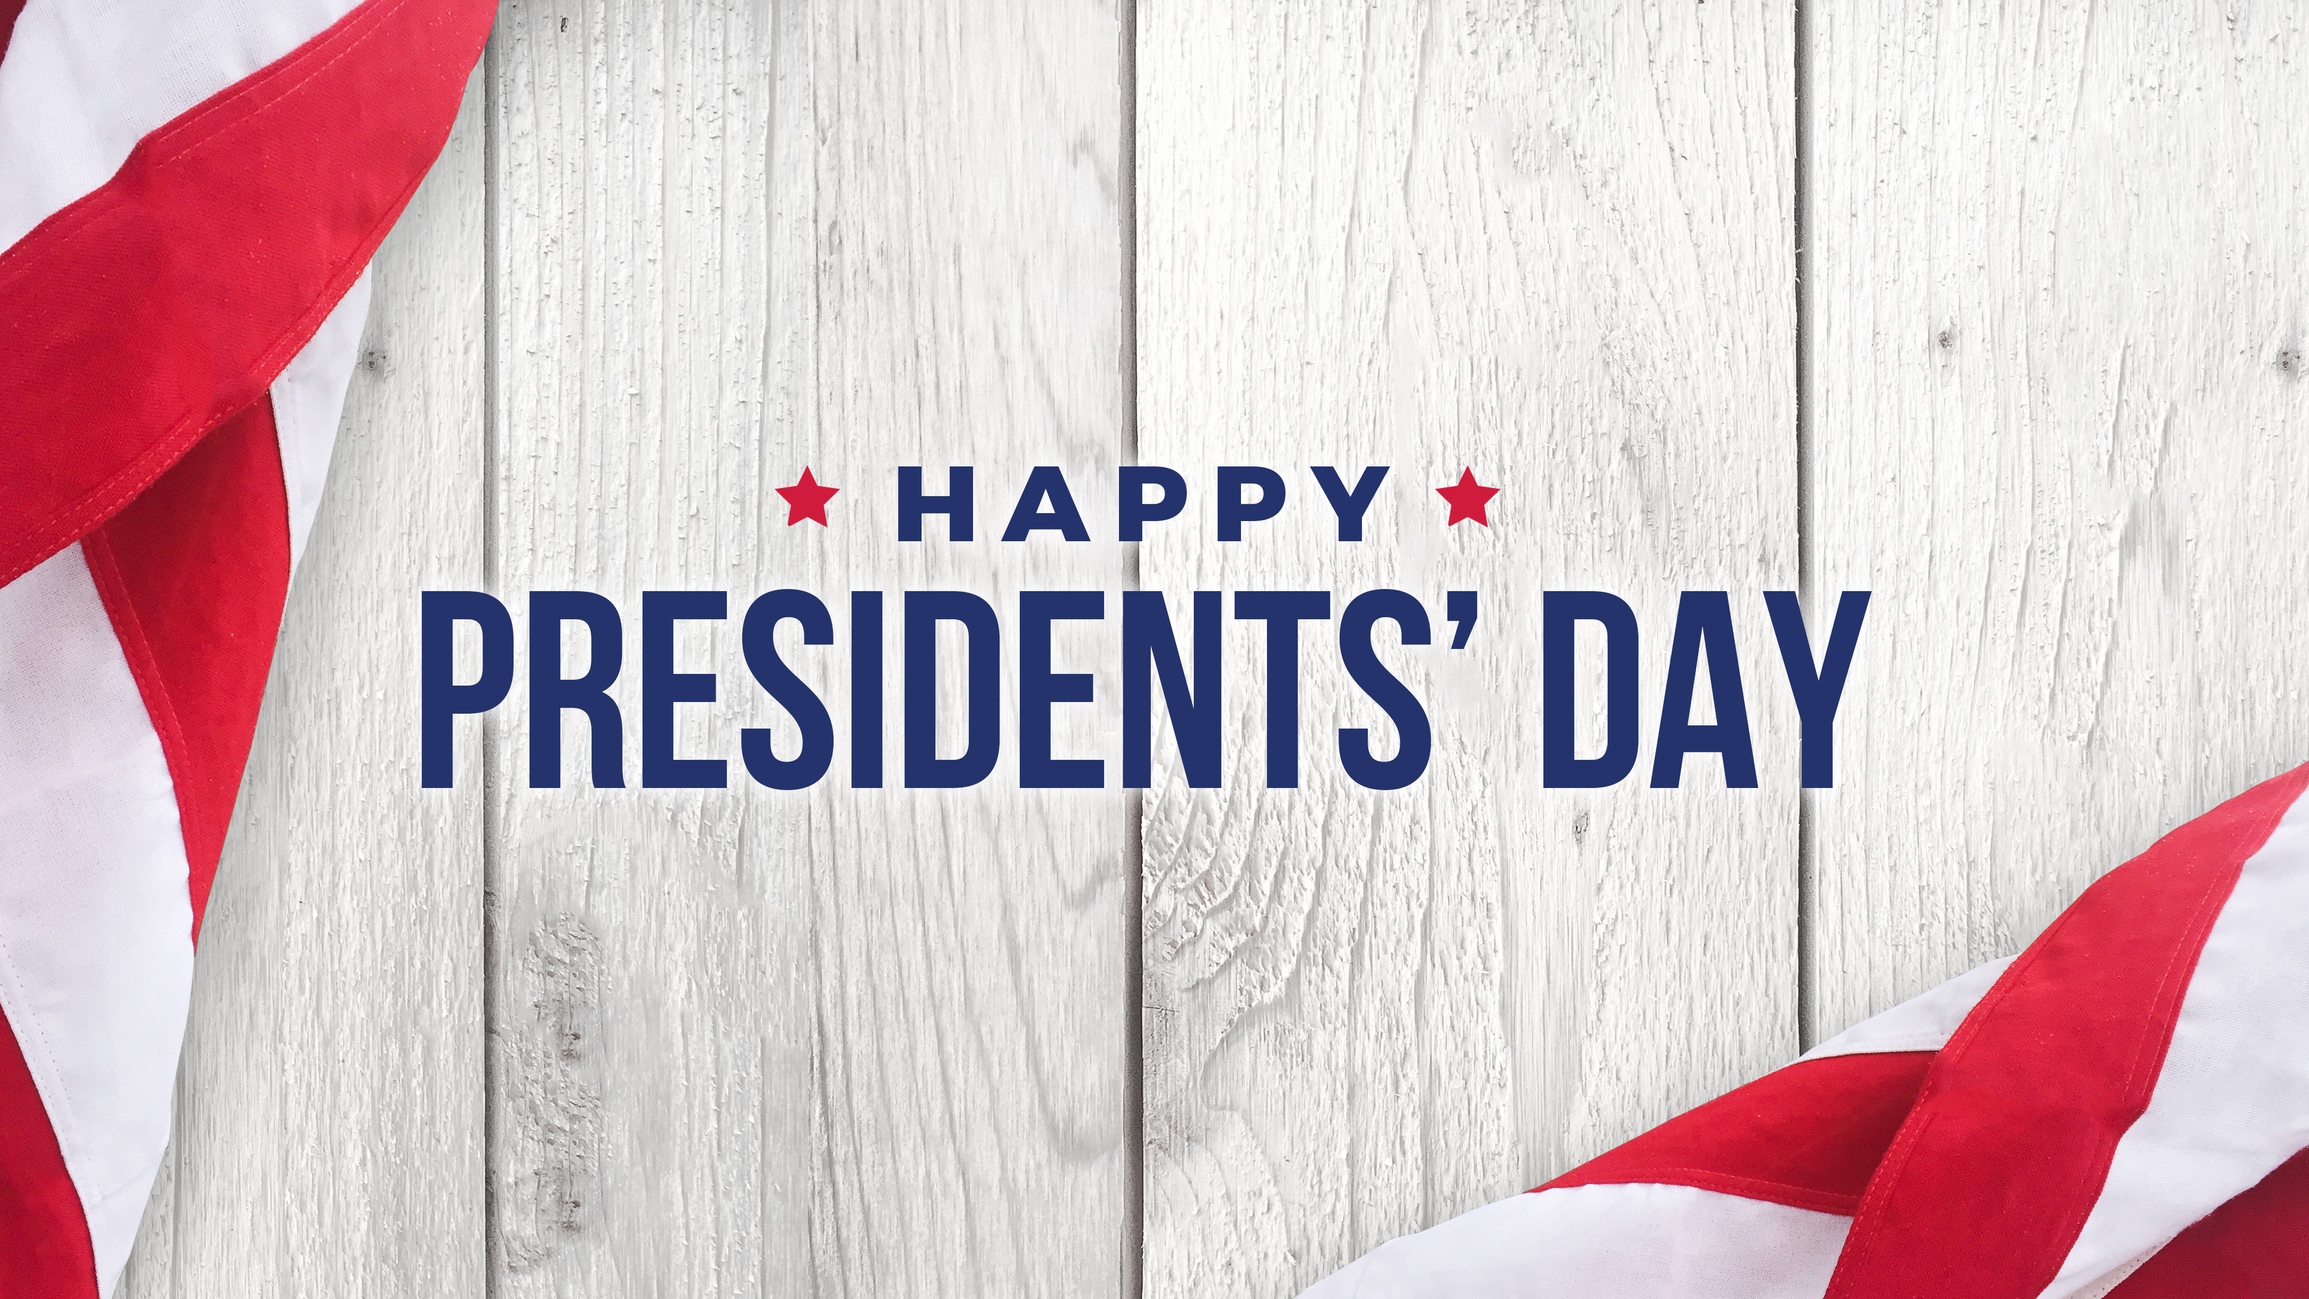 City Offices and Facilities Closed Feb. 19 for Presidents’ Day Holiday ...